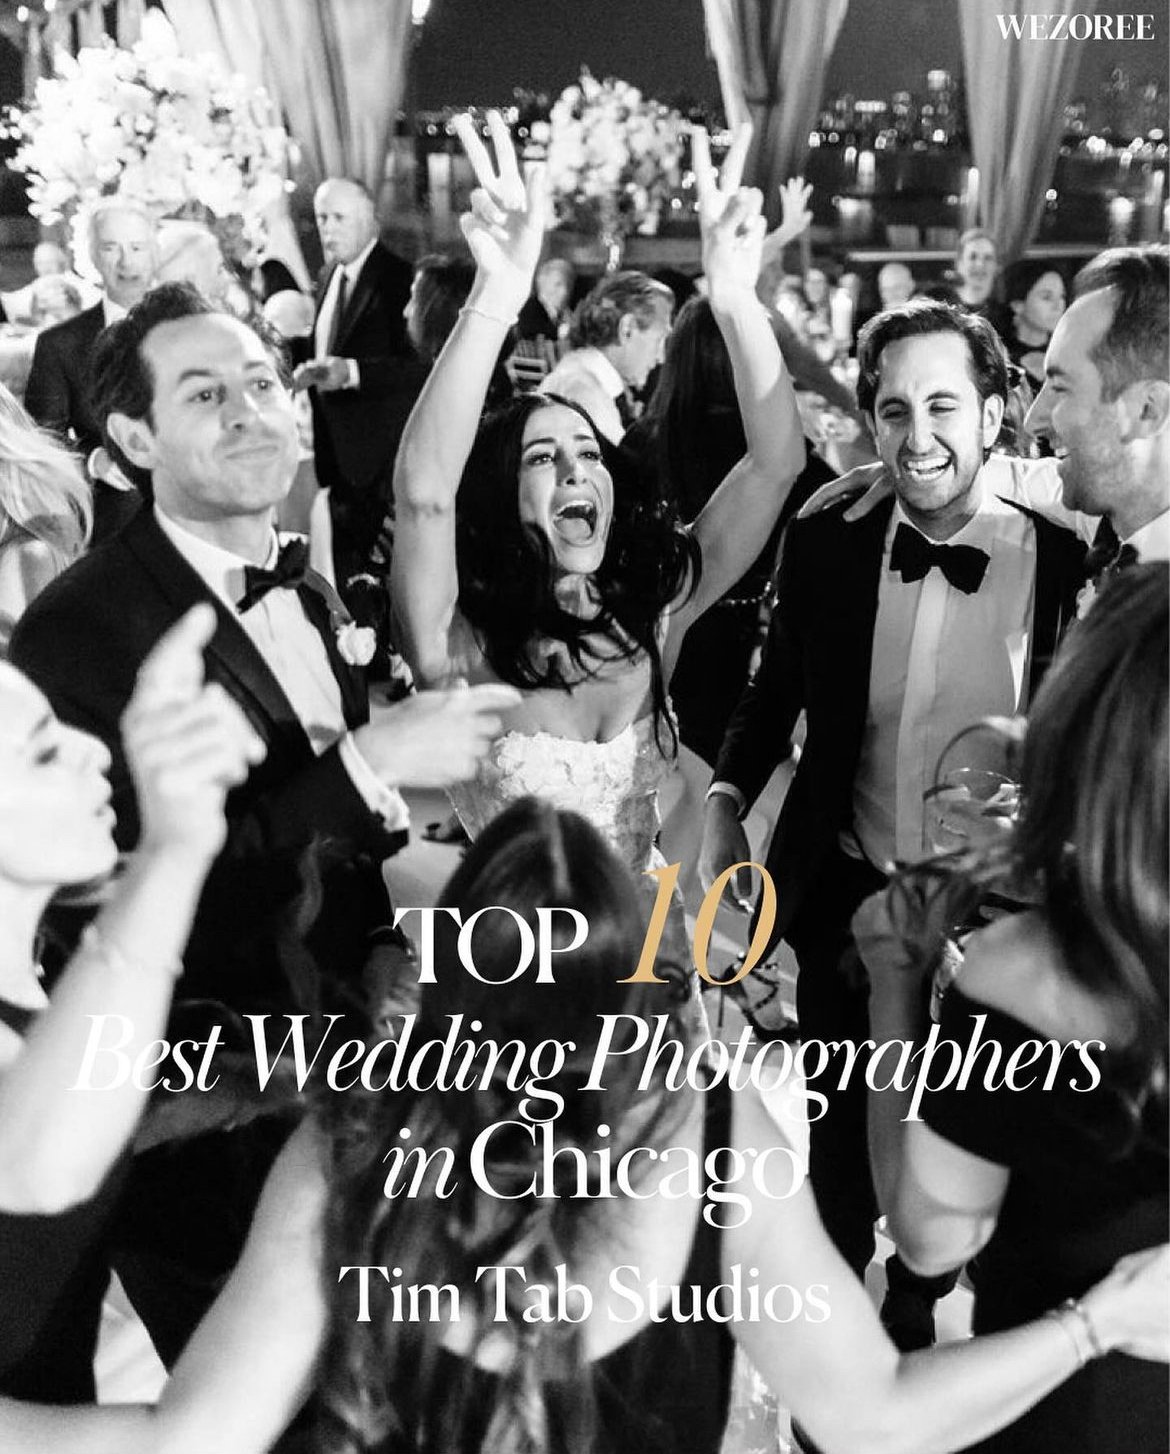 Tim Tab is named Top 10 wedding photographers in Chicago